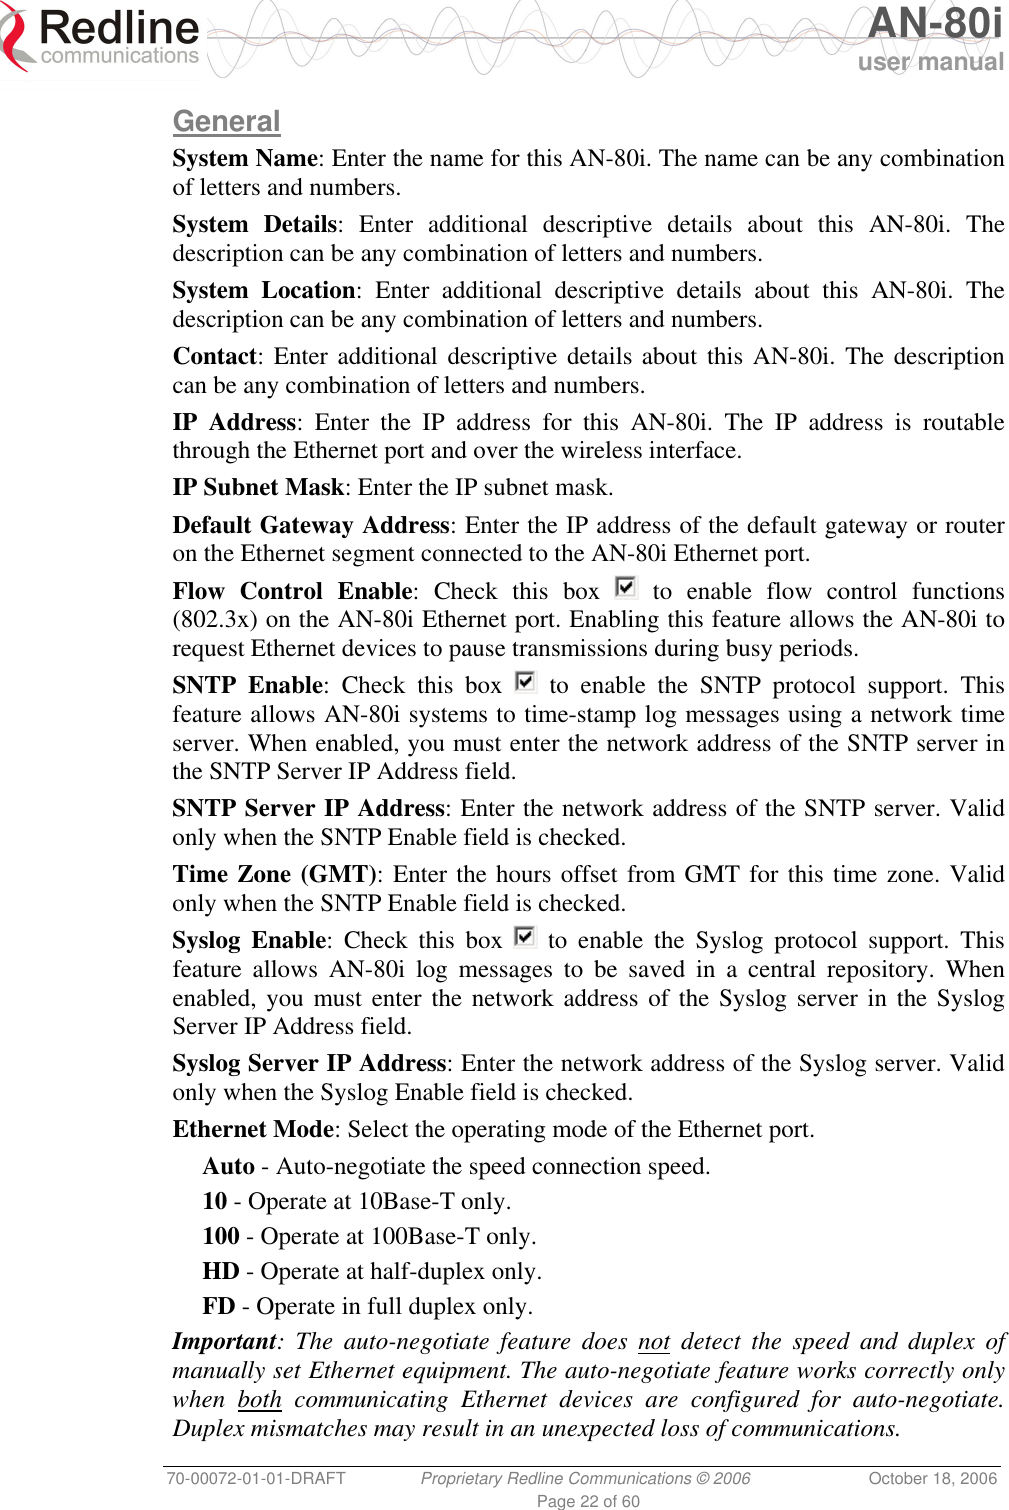   AN-80i user manual 70-00072-01-01-DRAFT  Proprietary Redline Communications © 2006  October 18, 2006 Page 22 of 60 General System Name: Enter the name for this AN-80i. The name can be any combination of letters and numbers. System Details: Enter additional descriptive details about this AN-80i. The description can be any combination of letters and numbers. System Location: Enter additional descriptive details about this AN-80i. The description can be any combination of letters and numbers. Contact: Enter additional descriptive details about this AN-80i. The description can be any combination of letters and numbers. IP Address: Enter the IP address for this AN-80i. The IP address is routable through the Ethernet port and over the wireless interface. IP Subnet Mask: Enter the IP subnet mask. Default Gateway Address: Enter the IP address of the default gateway or router on the Ethernet segment connected to the AN-80i Ethernet port. Flow Control Enable: Check this box   to enable flow control functions (802.3x) on the AN-80i Ethernet port. Enabling this feature allows the AN-80i to request Ethernet devices to pause transmissions during busy periods. SNTP Enable: Check this box   to enable the SNTP protocol support. This feature allows AN-80i systems to time-stamp log messages using a network time server. When enabled, you must enter the network address of the SNTP server in the SNTP Server IP Address field.  SNTP Server IP Address: Enter the network address of the SNTP server. Valid only when the SNTP Enable field is checked. Time Zone (GMT): Enter the hours offset from GMT for this time zone. Valid only when the SNTP Enable field is checked. Syslog Enable: Check this box   to enable the Syslog protocol support. This feature allows AN-80i log messages to be saved in a central repository. When enabled, you must enter the network address of the Syslog server in the Syslog Server IP Address field. Syslog Server IP Address: Enter the network address of the Syslog server. Valid only when the Syslog Enable field is checked. Ethernet Mode: Select the operating mode of the Ethernet port. Auto - Auto-negotiate the speed connection speed. 10 - Operate at 10Base-T only. 100 - Operate at 100Base-T only. HD - Operate at half-duplex only. FD - Operate in full duplex only. Important: The auto-negotiate feature does not detect the speed and duplex of manually set Ethernet equipment. The auto-negotiate feature works correctly only when both communicating Ethernet devices are configured for auto-negotiate. Duplex mismatches may result in an unexpected loss of communications. 